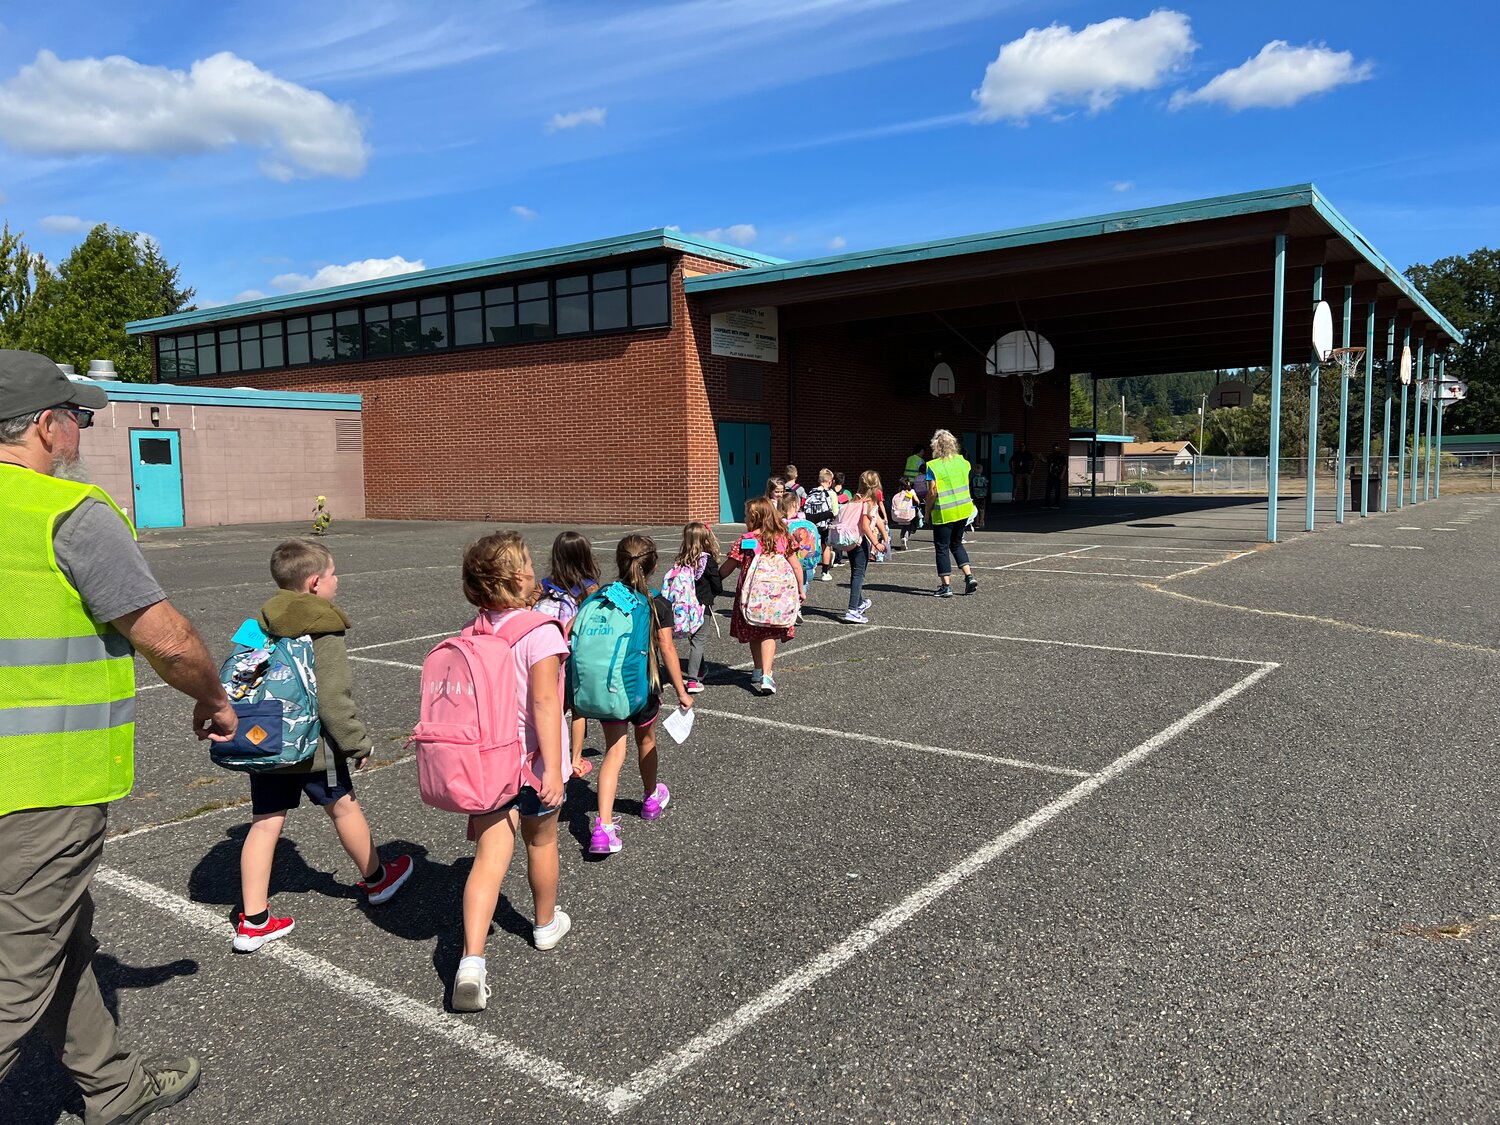 Students are walked into Olympic School by volunteers for the Bethel After-School Program, which launched Sept. 13, provides games, art, conversation and other activities from 12:30-4 p.m. every Wednesday. (Photo: Brian Mittge)